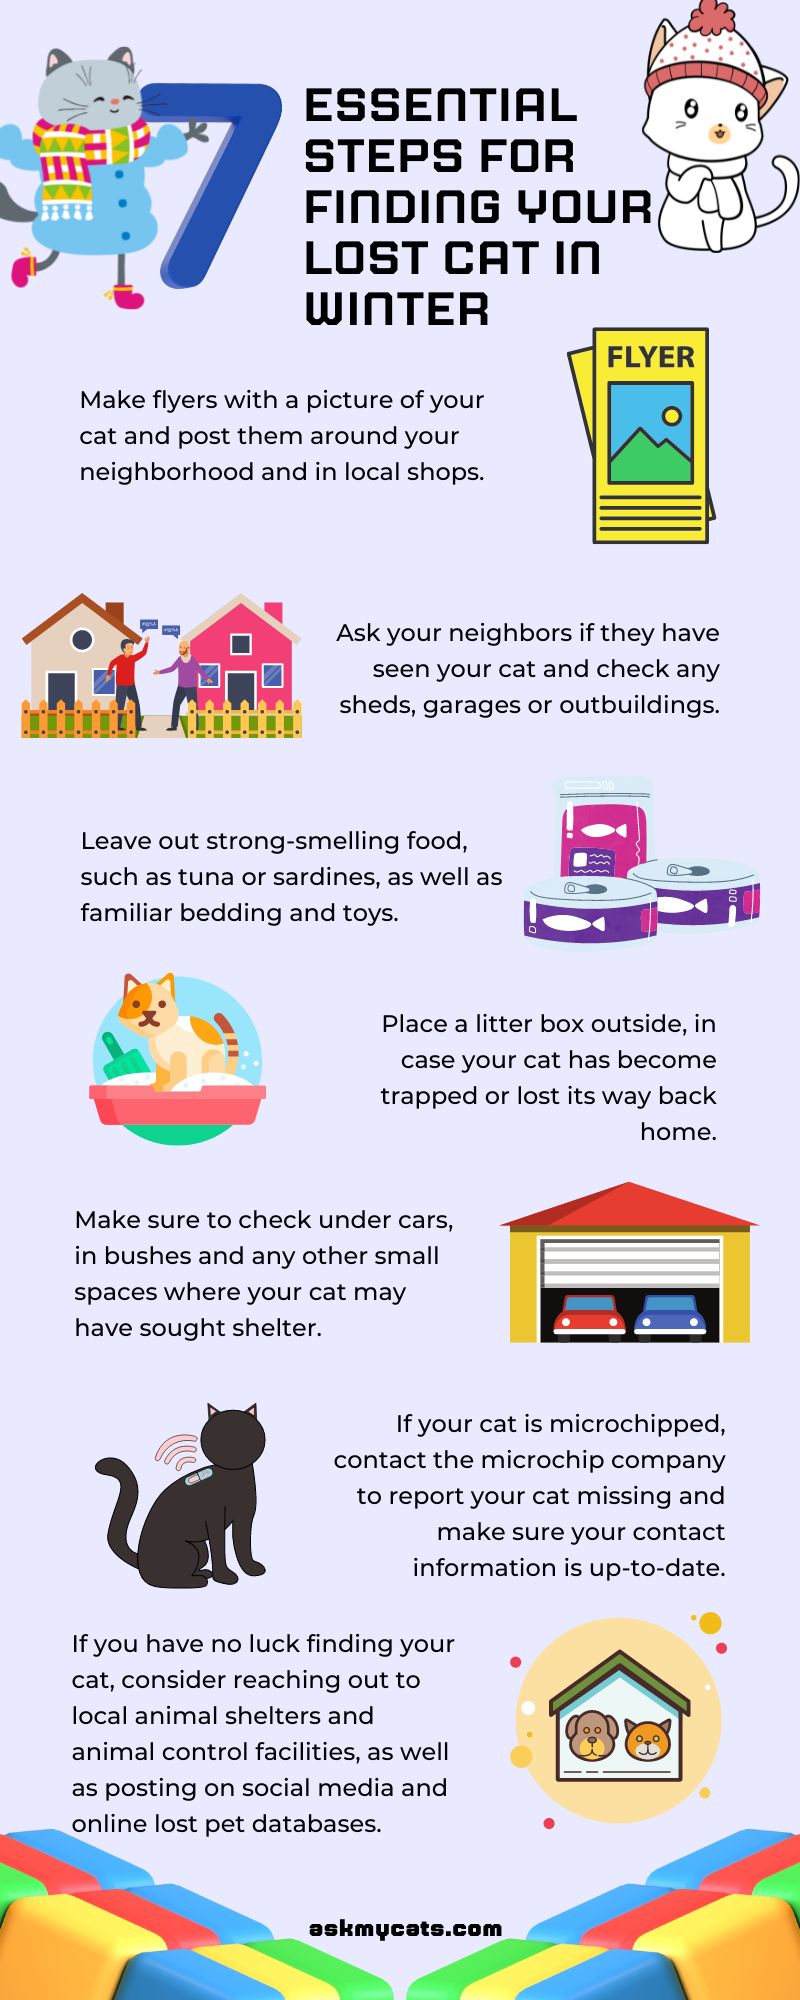 Essential Steps for Finding Your Lost Cat in Winter (Infographic)